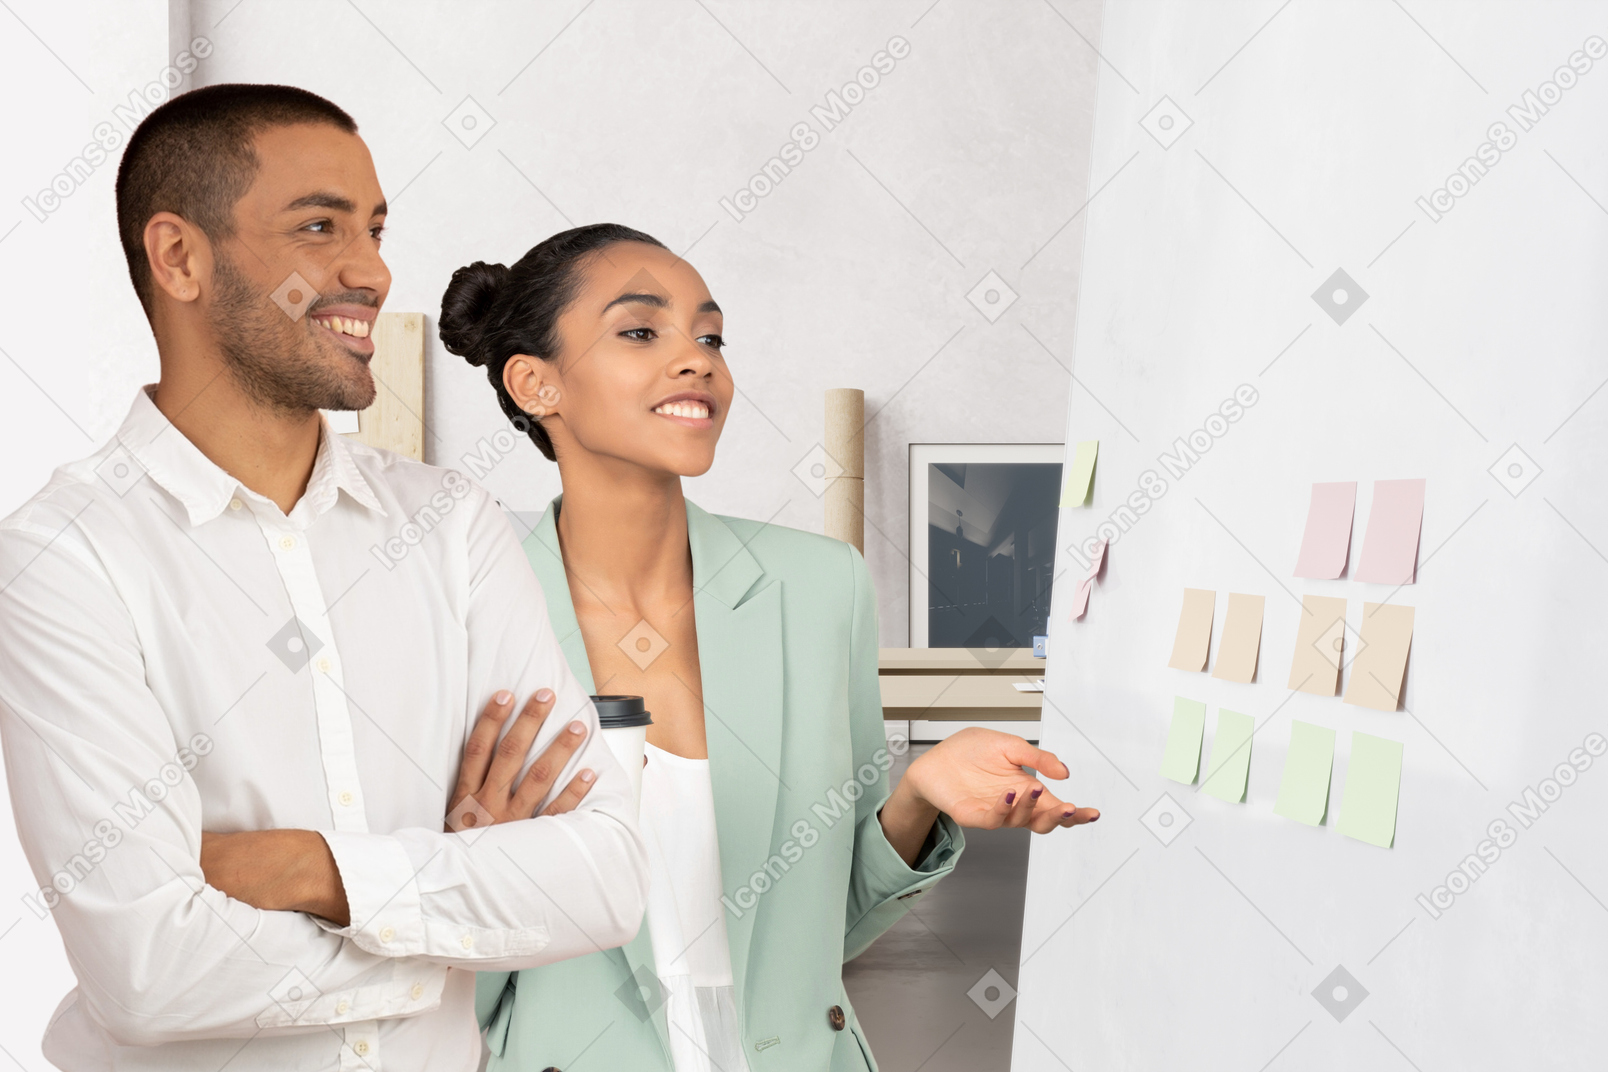 Man and woman talking in the office